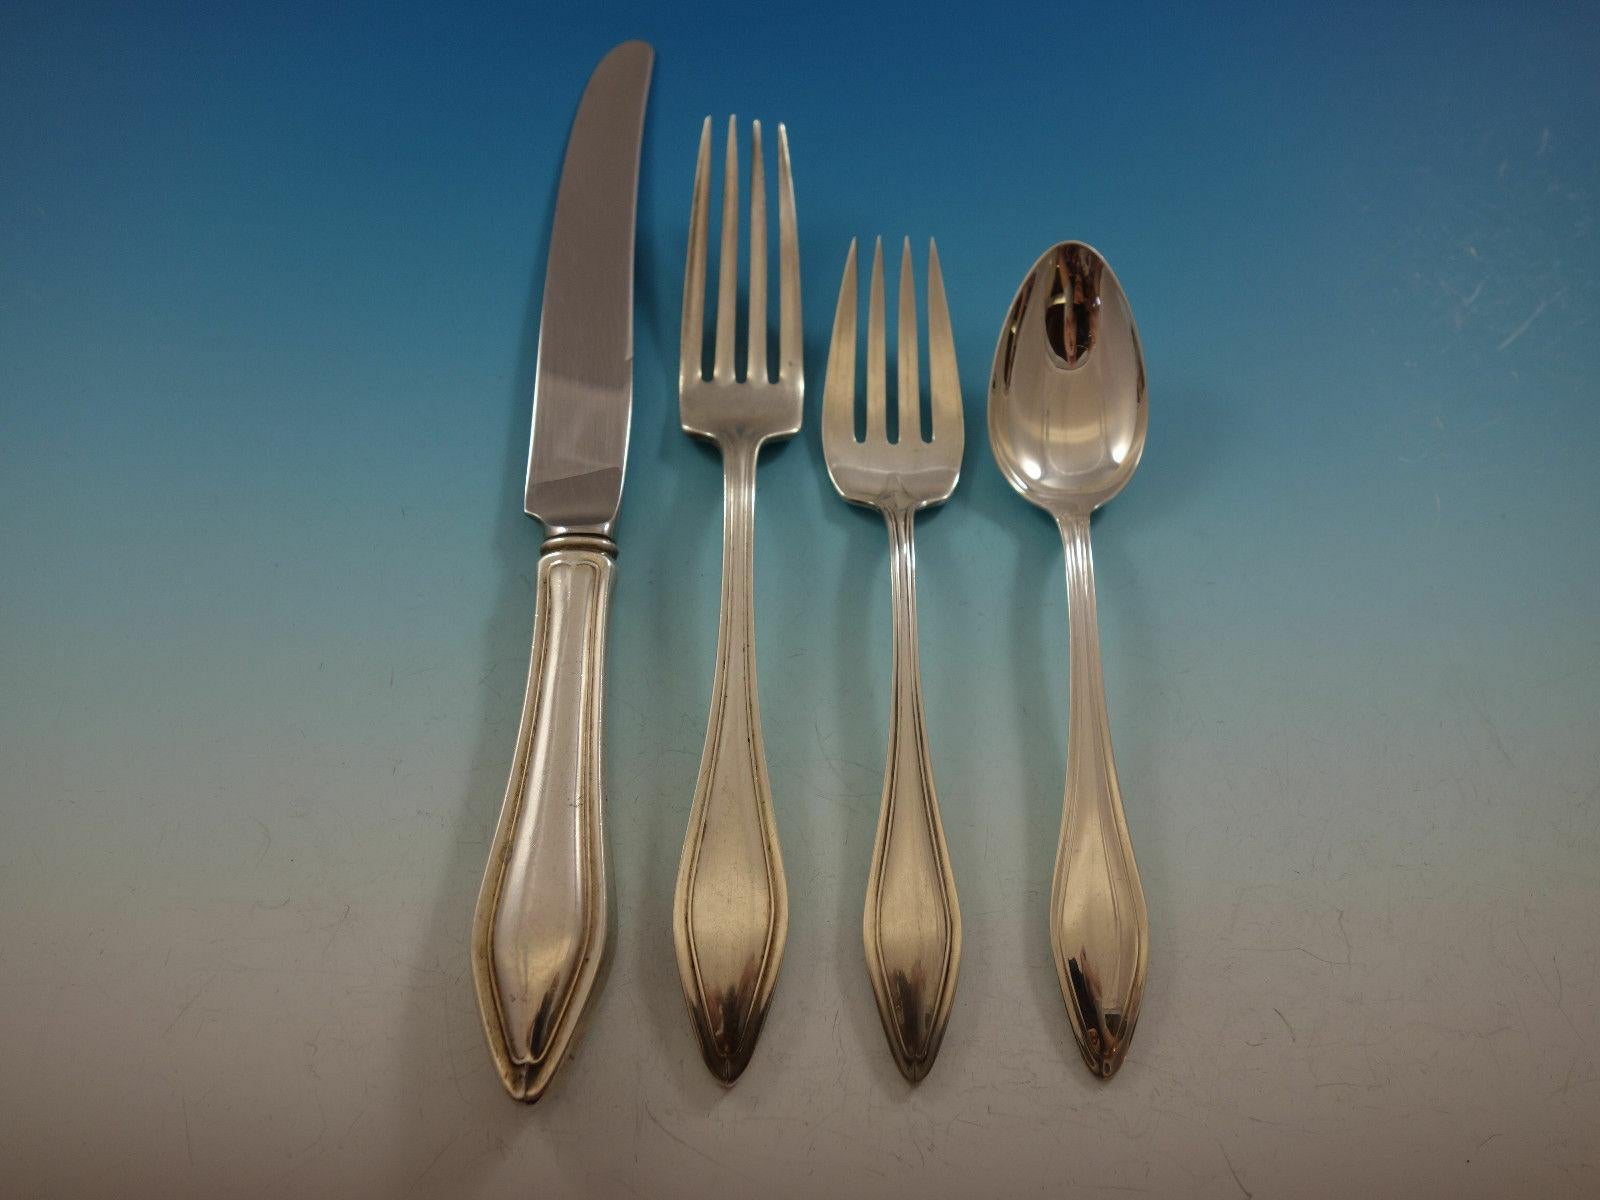 Exquisite Mary Chilton by Towle sterling silver flatware set - 77 pieces. This set includes:

12 knives, 8 7/8